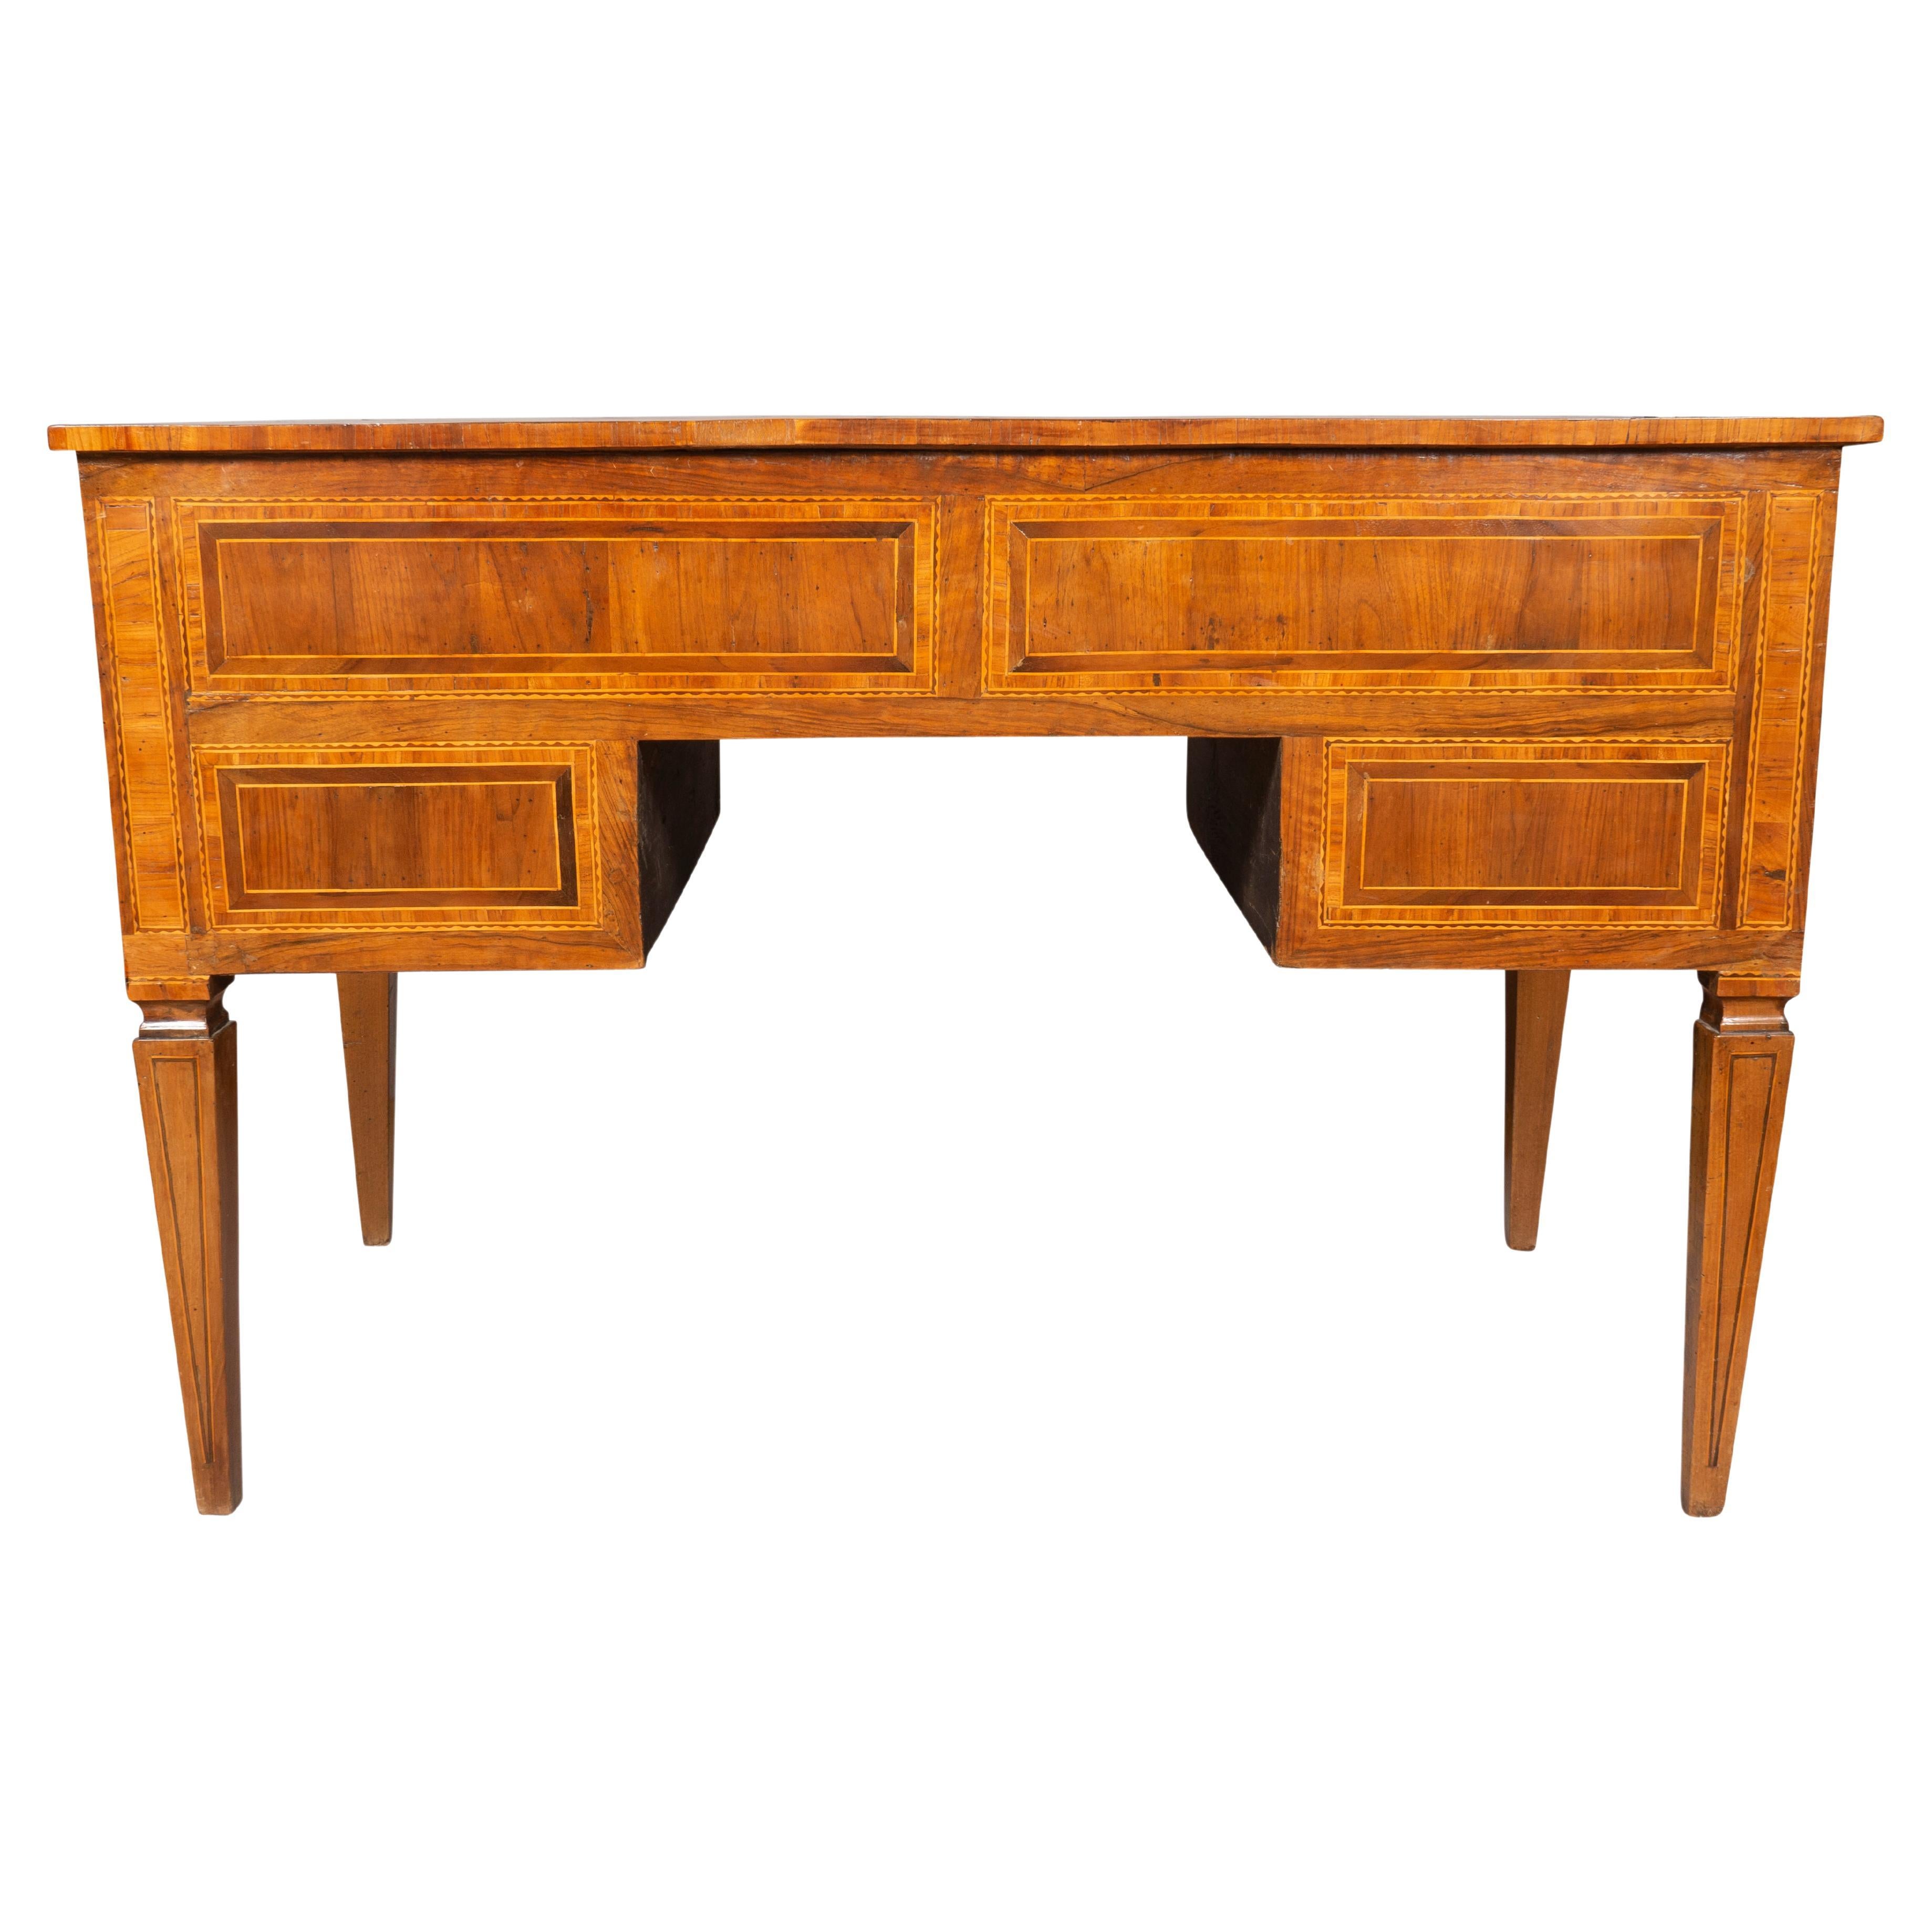 North Italian Neoclassical Walnut and Inlaid Writing Table In Good Condition For Sale In Essex, MA